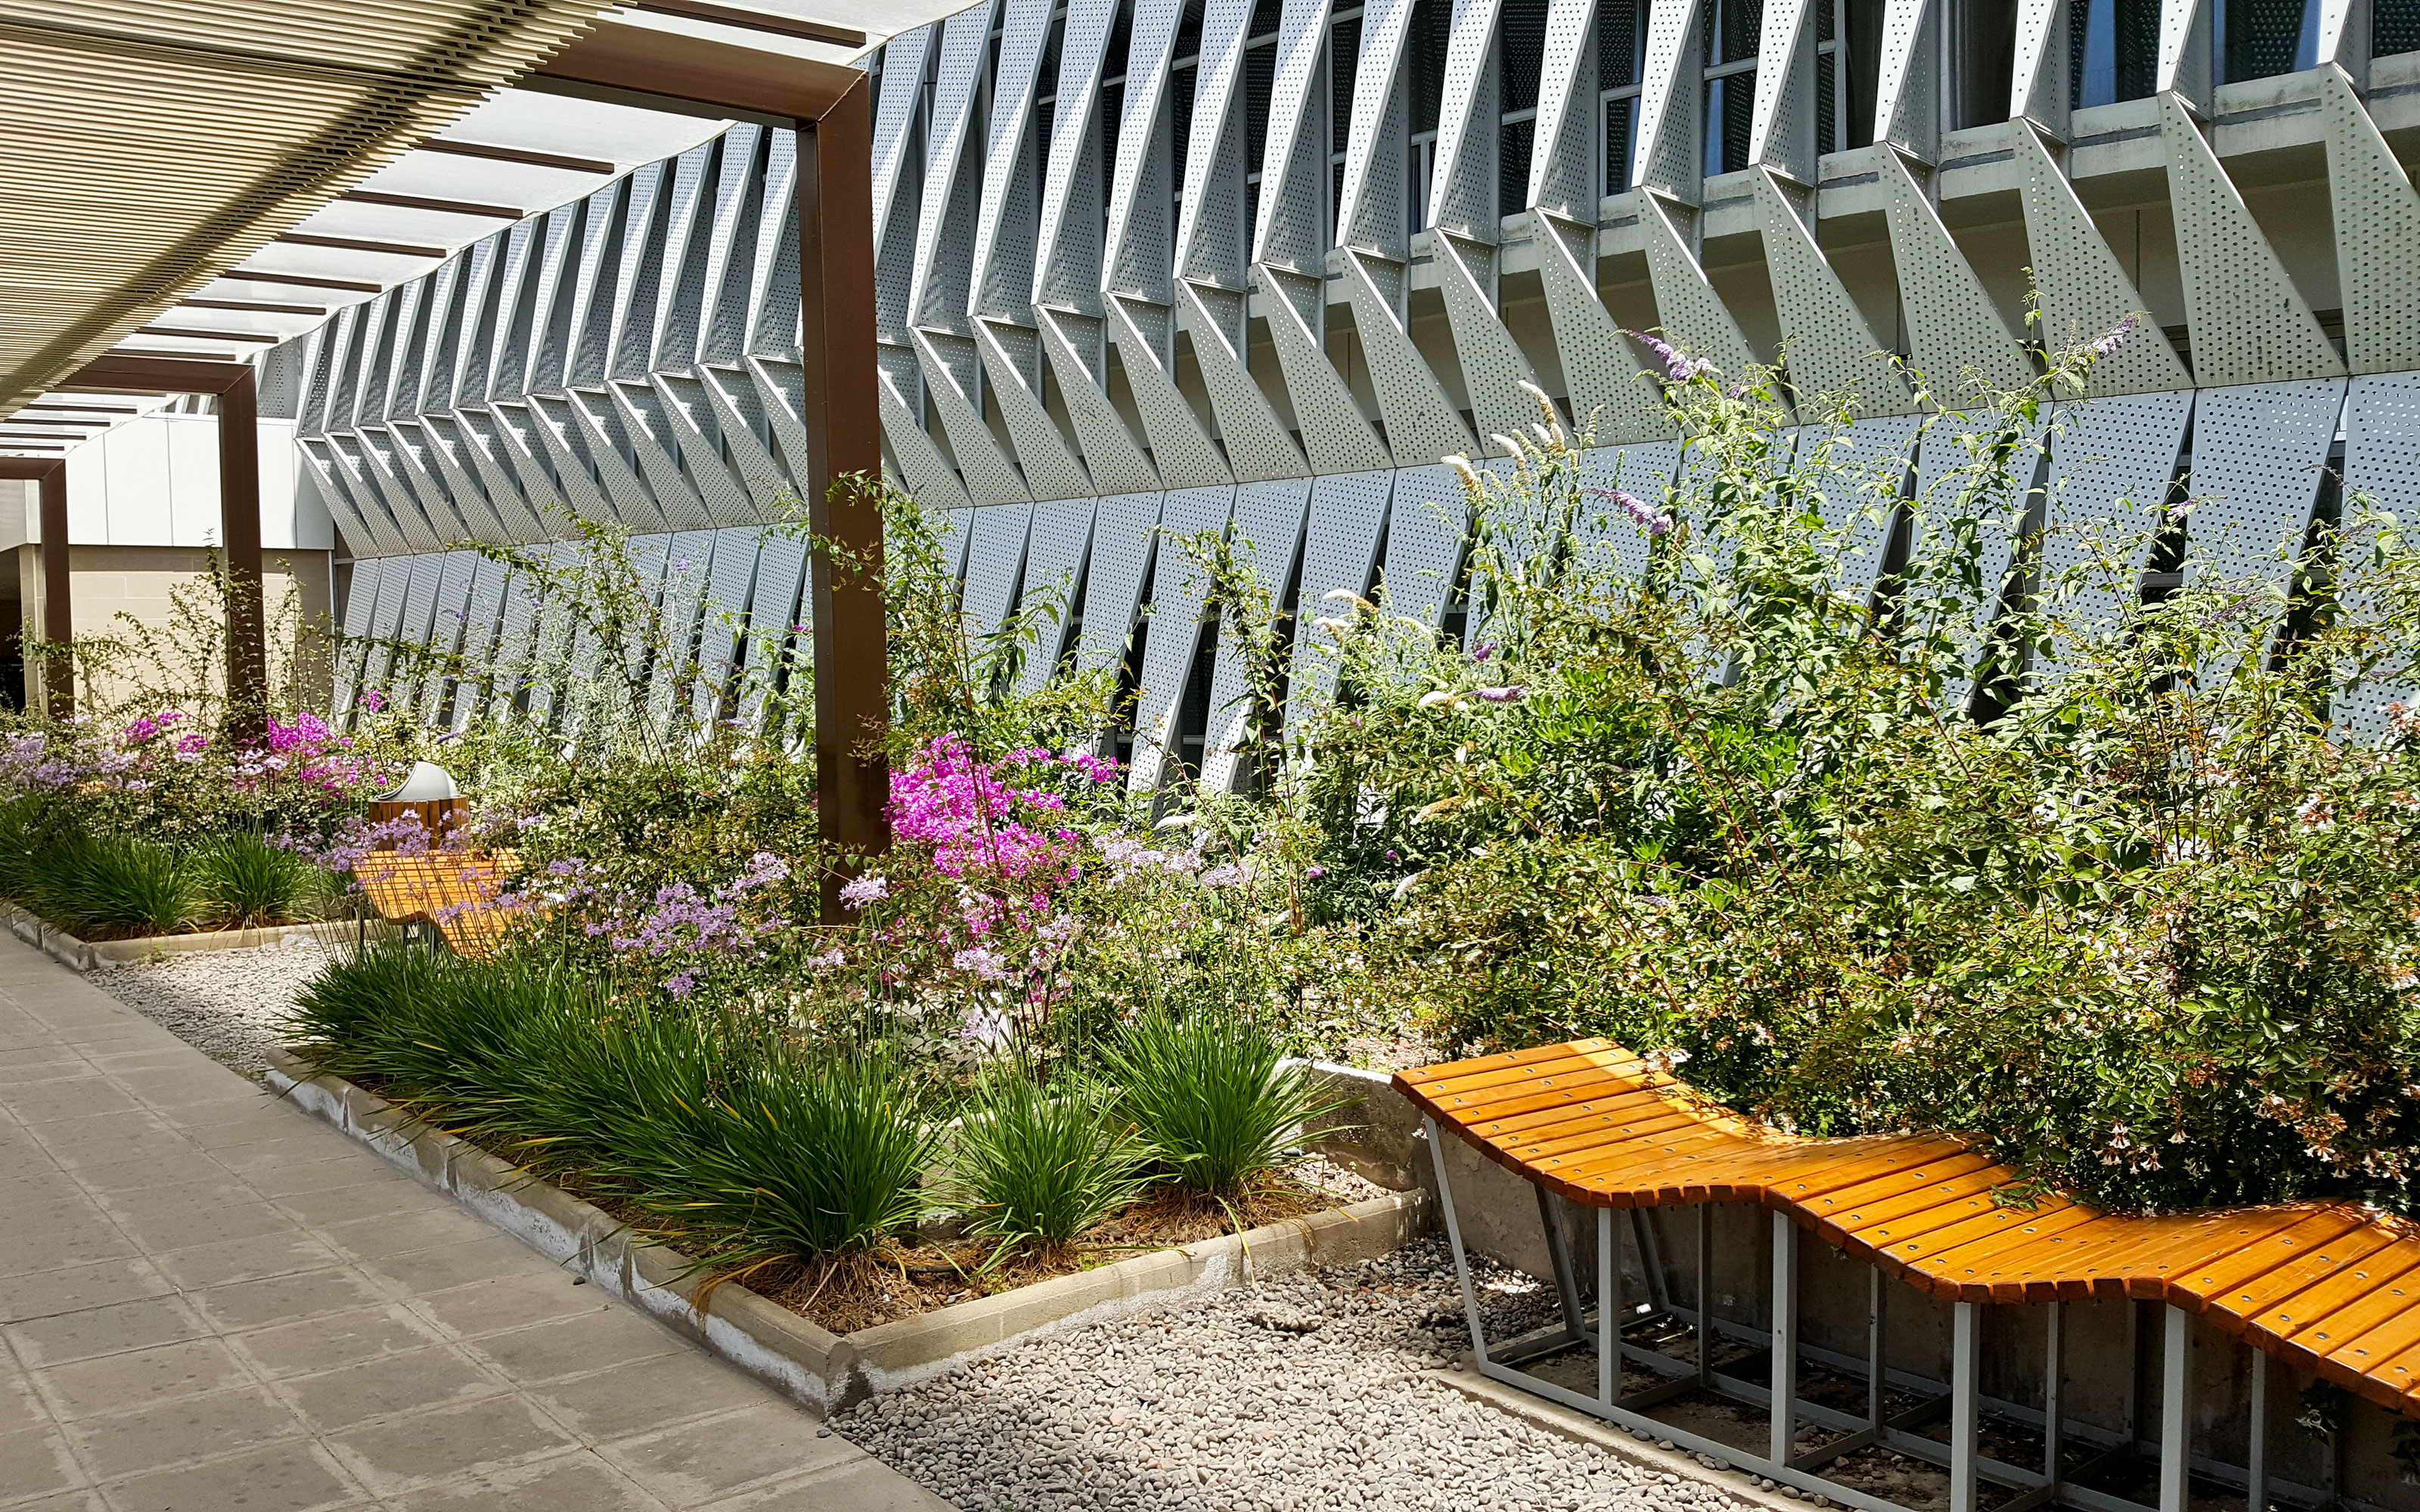 Plant beds with flowers and wave-like benches